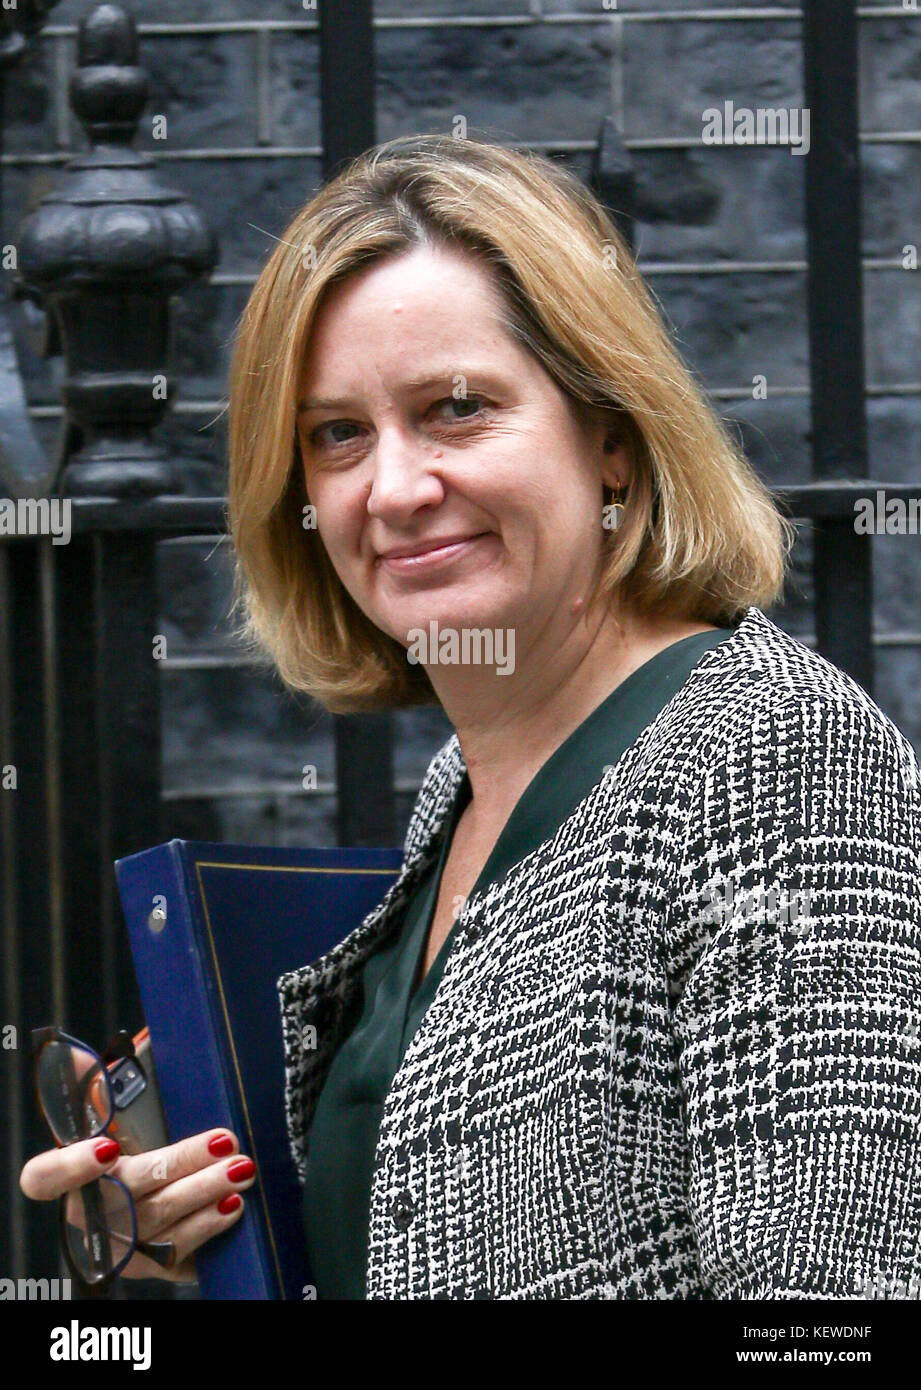 London, UK. 24th October, 2017. Home Secretary Amber Rudd returning to 10 Downing Street this afternoon after earlier attending the weekly Cabinet meeting. Credit: Derek Peters/Alamy Live News Stock Photo